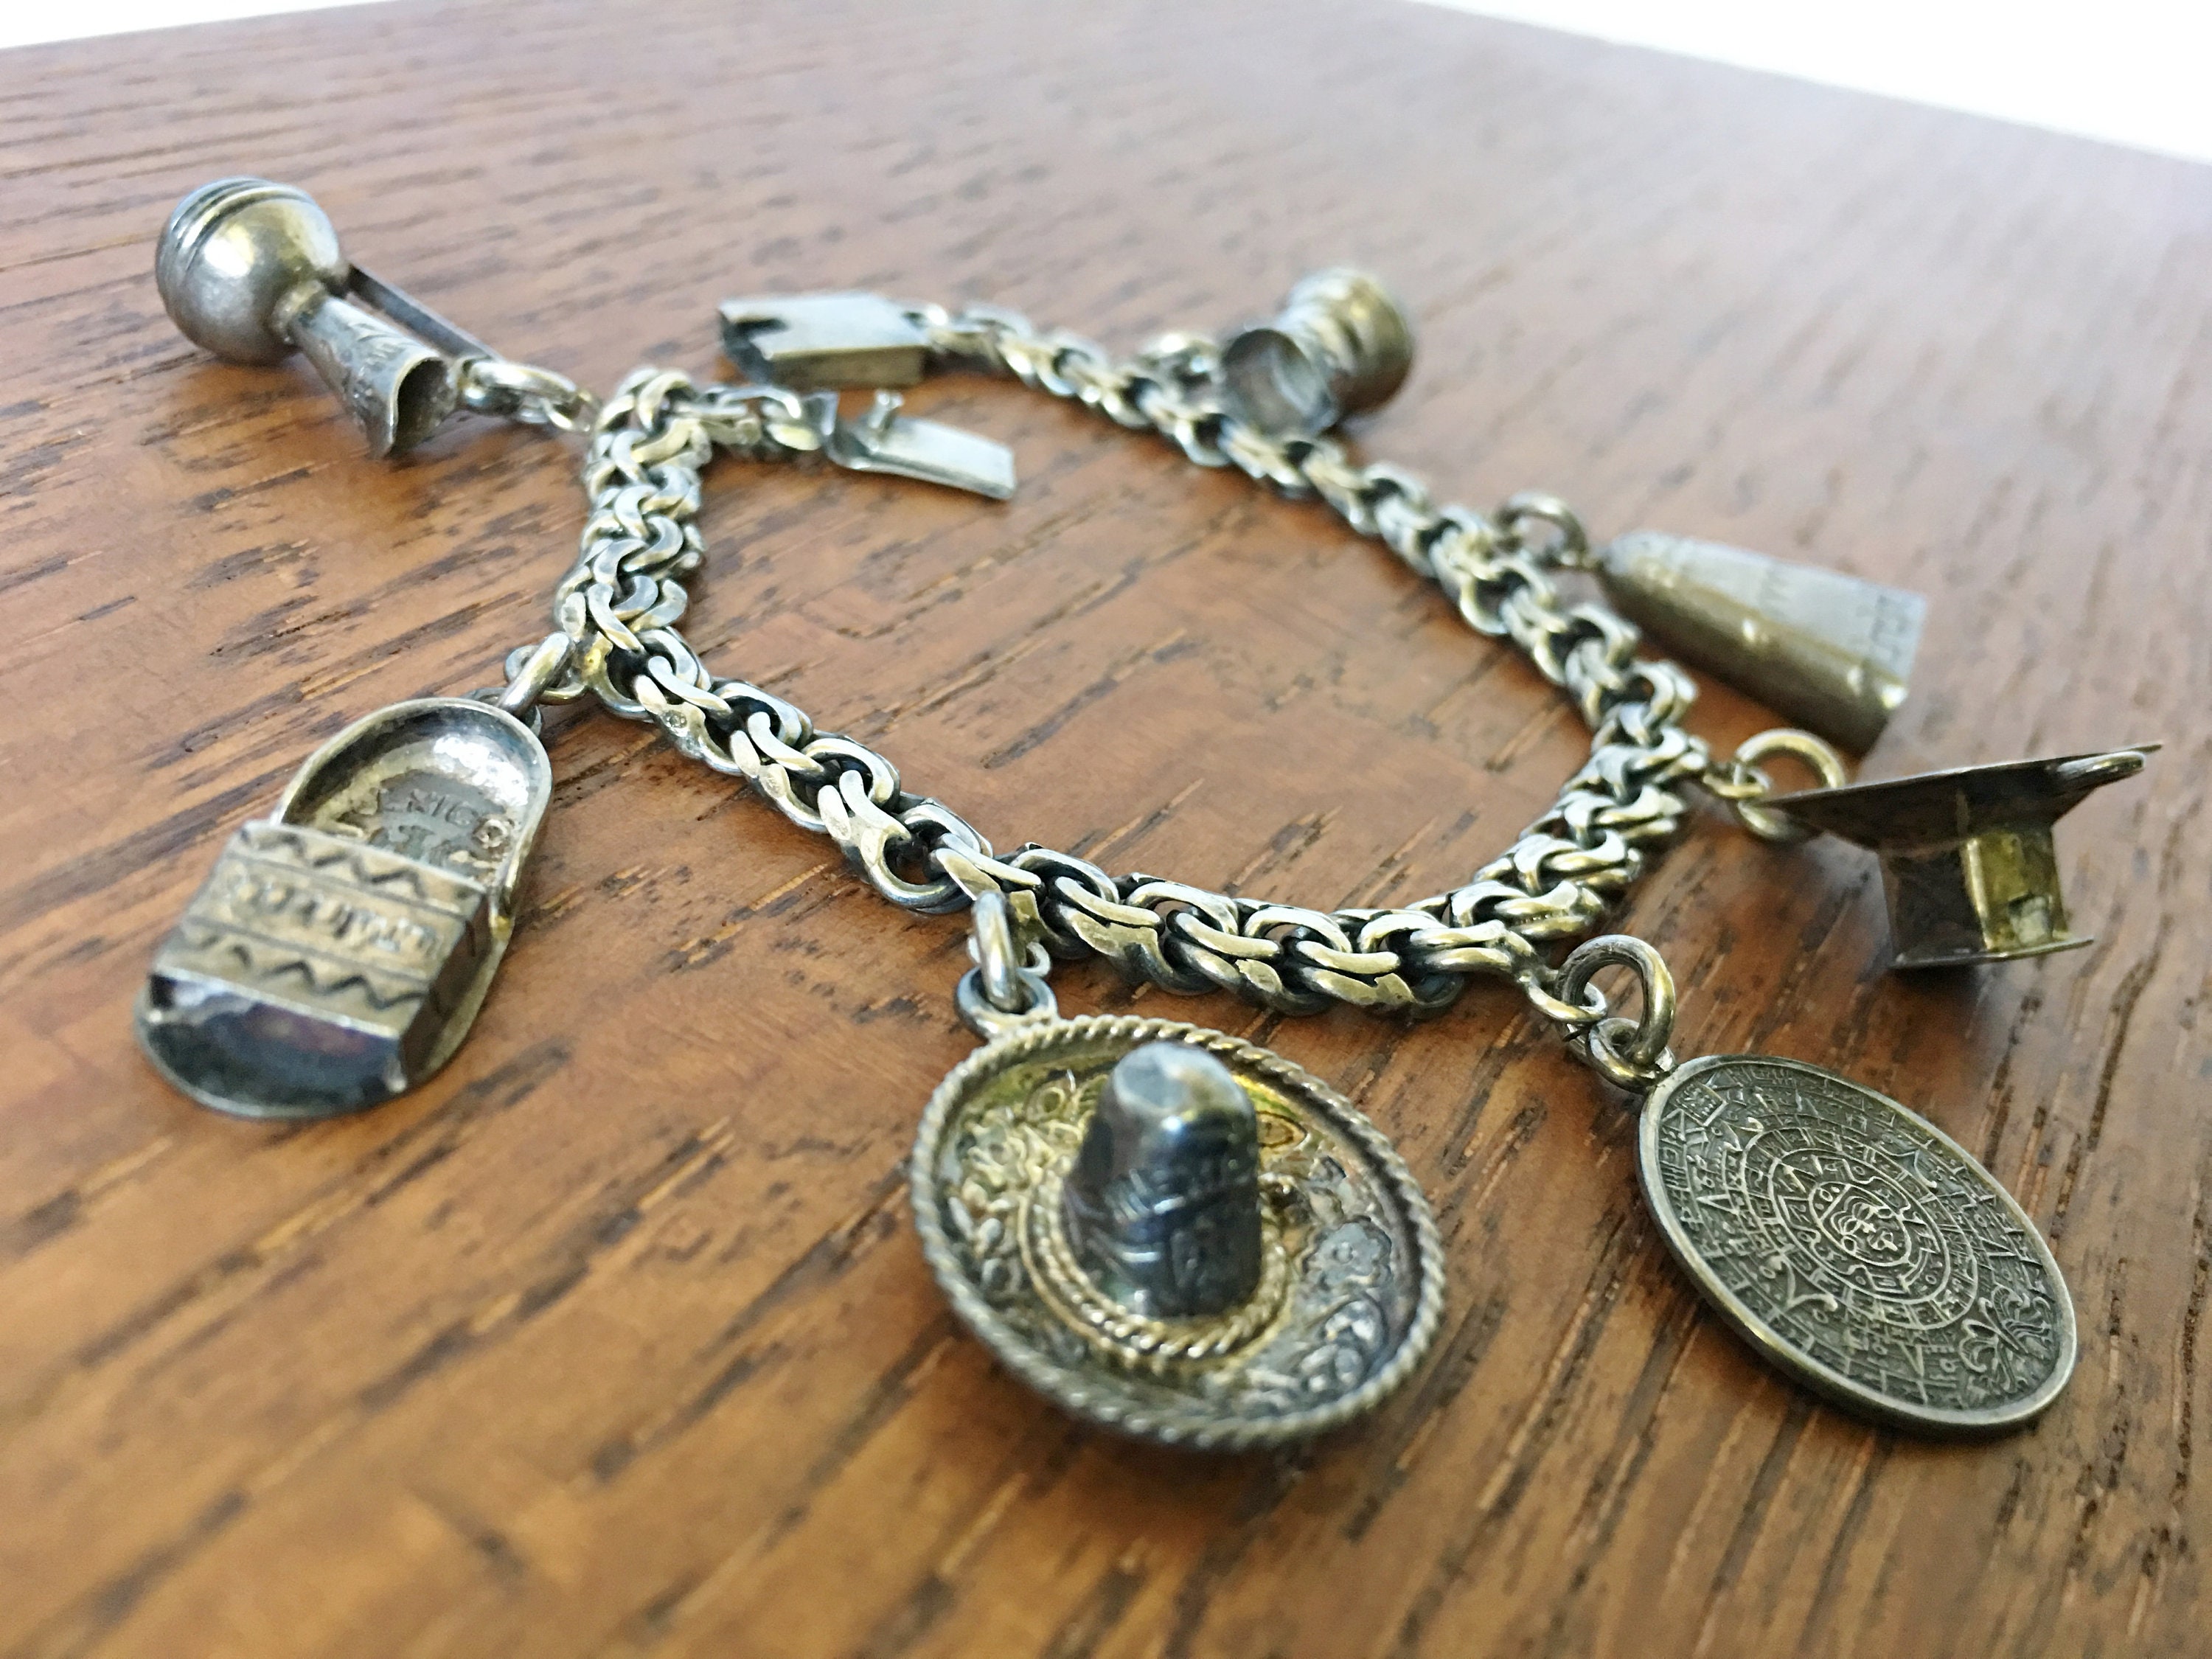 Sold at Auction: MEXICAN STERLING SILVER CHARM BRACELET